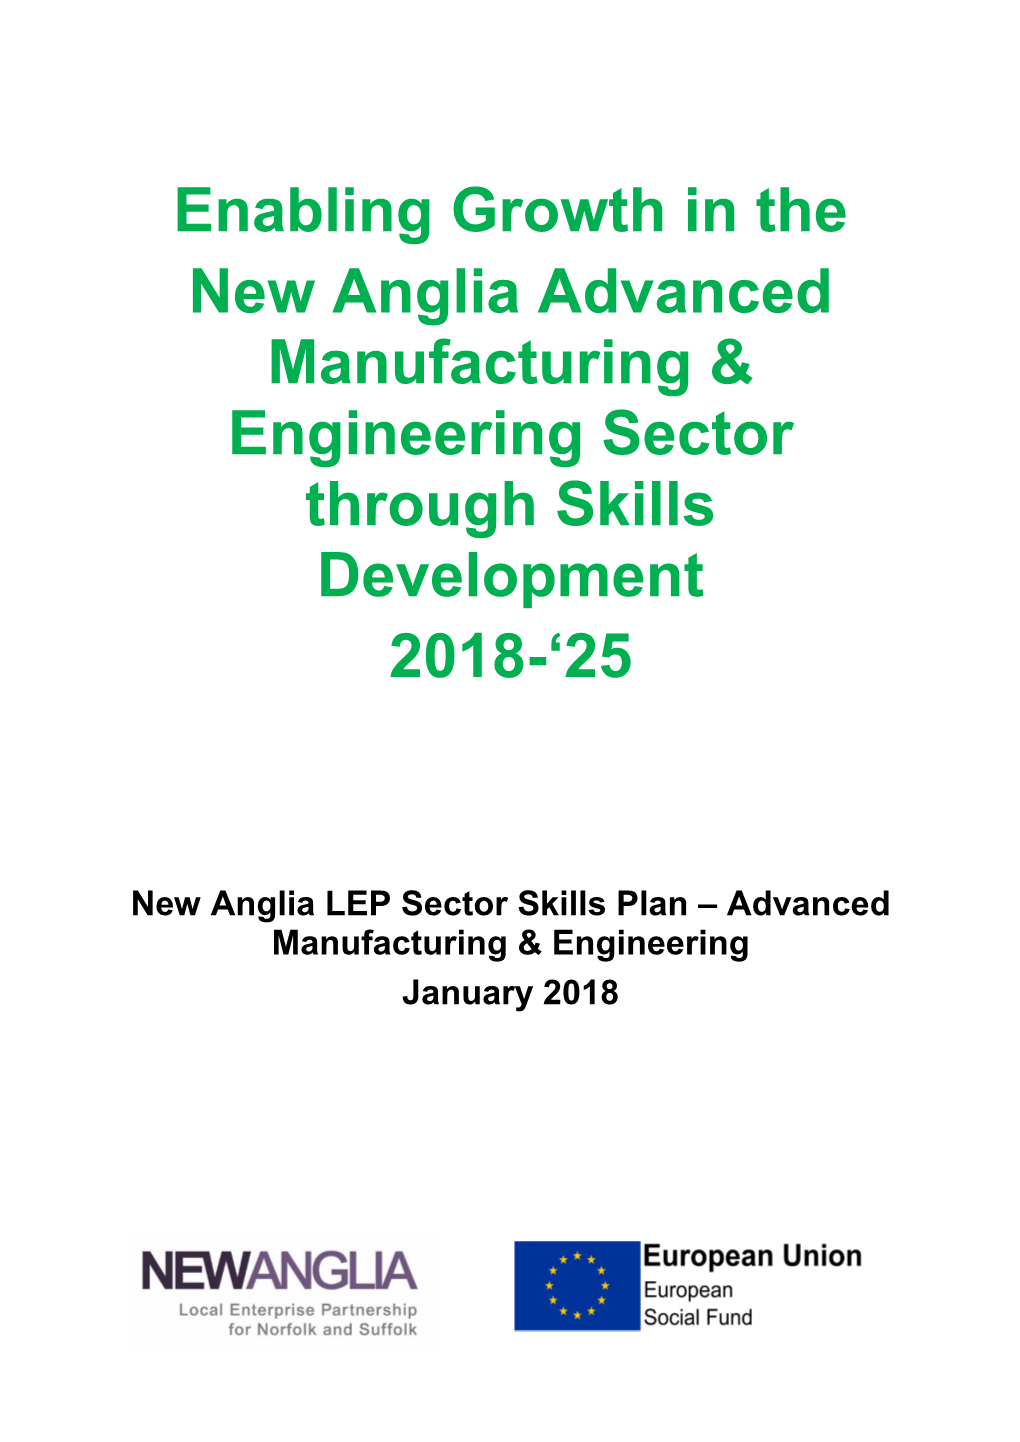 Enabling Growth in the New Anglia Advanced Manufacturing & Engineering Sector Through Skills Development 2018-'25